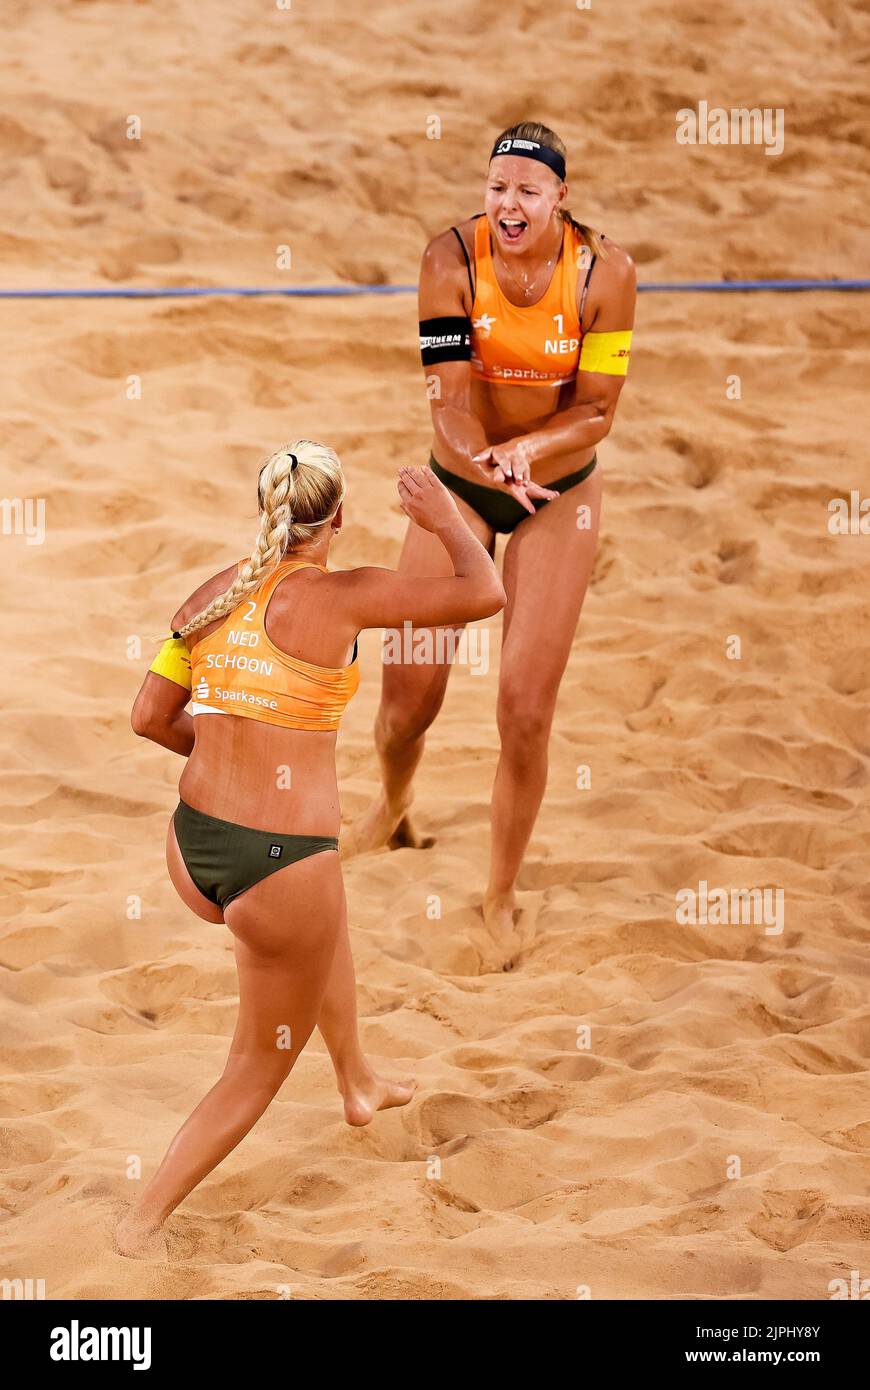 MUNCHEN - Raïsa Schoon (l) and Katja Stam (r) in action during the preliminary round of beach volleyball for women on the eighth day of the Multi-European Championship. The German city of Munich will host a combined European Championship of various sports in 2022. ANP IRIS VAN DEN BROEK Stock Photo